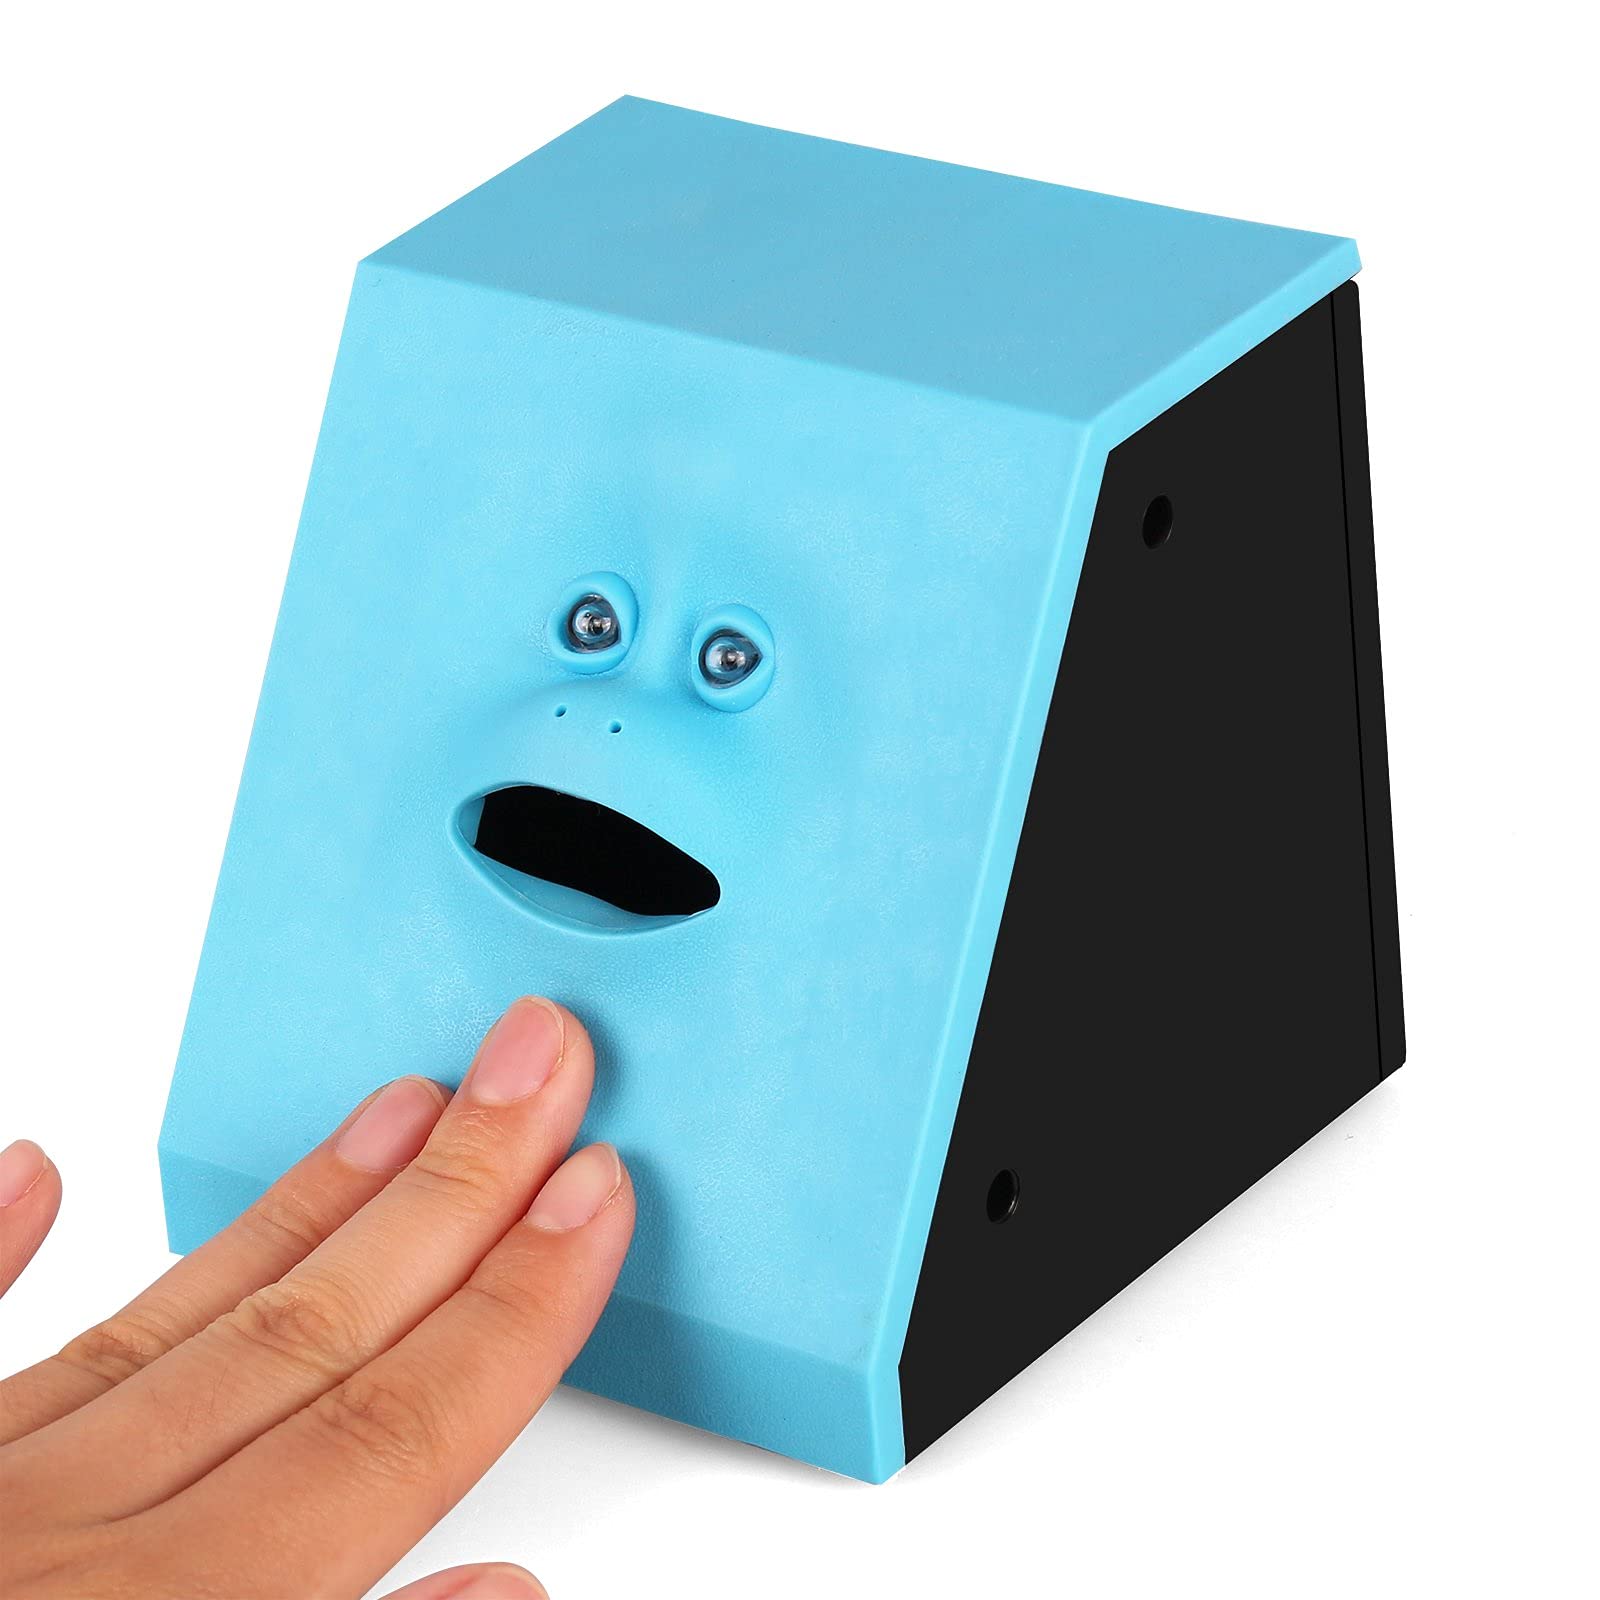 Buy Money Safe ATM Machine piggy bank- Blue Coin Bank for kids Online @ ₹ from ShopClues